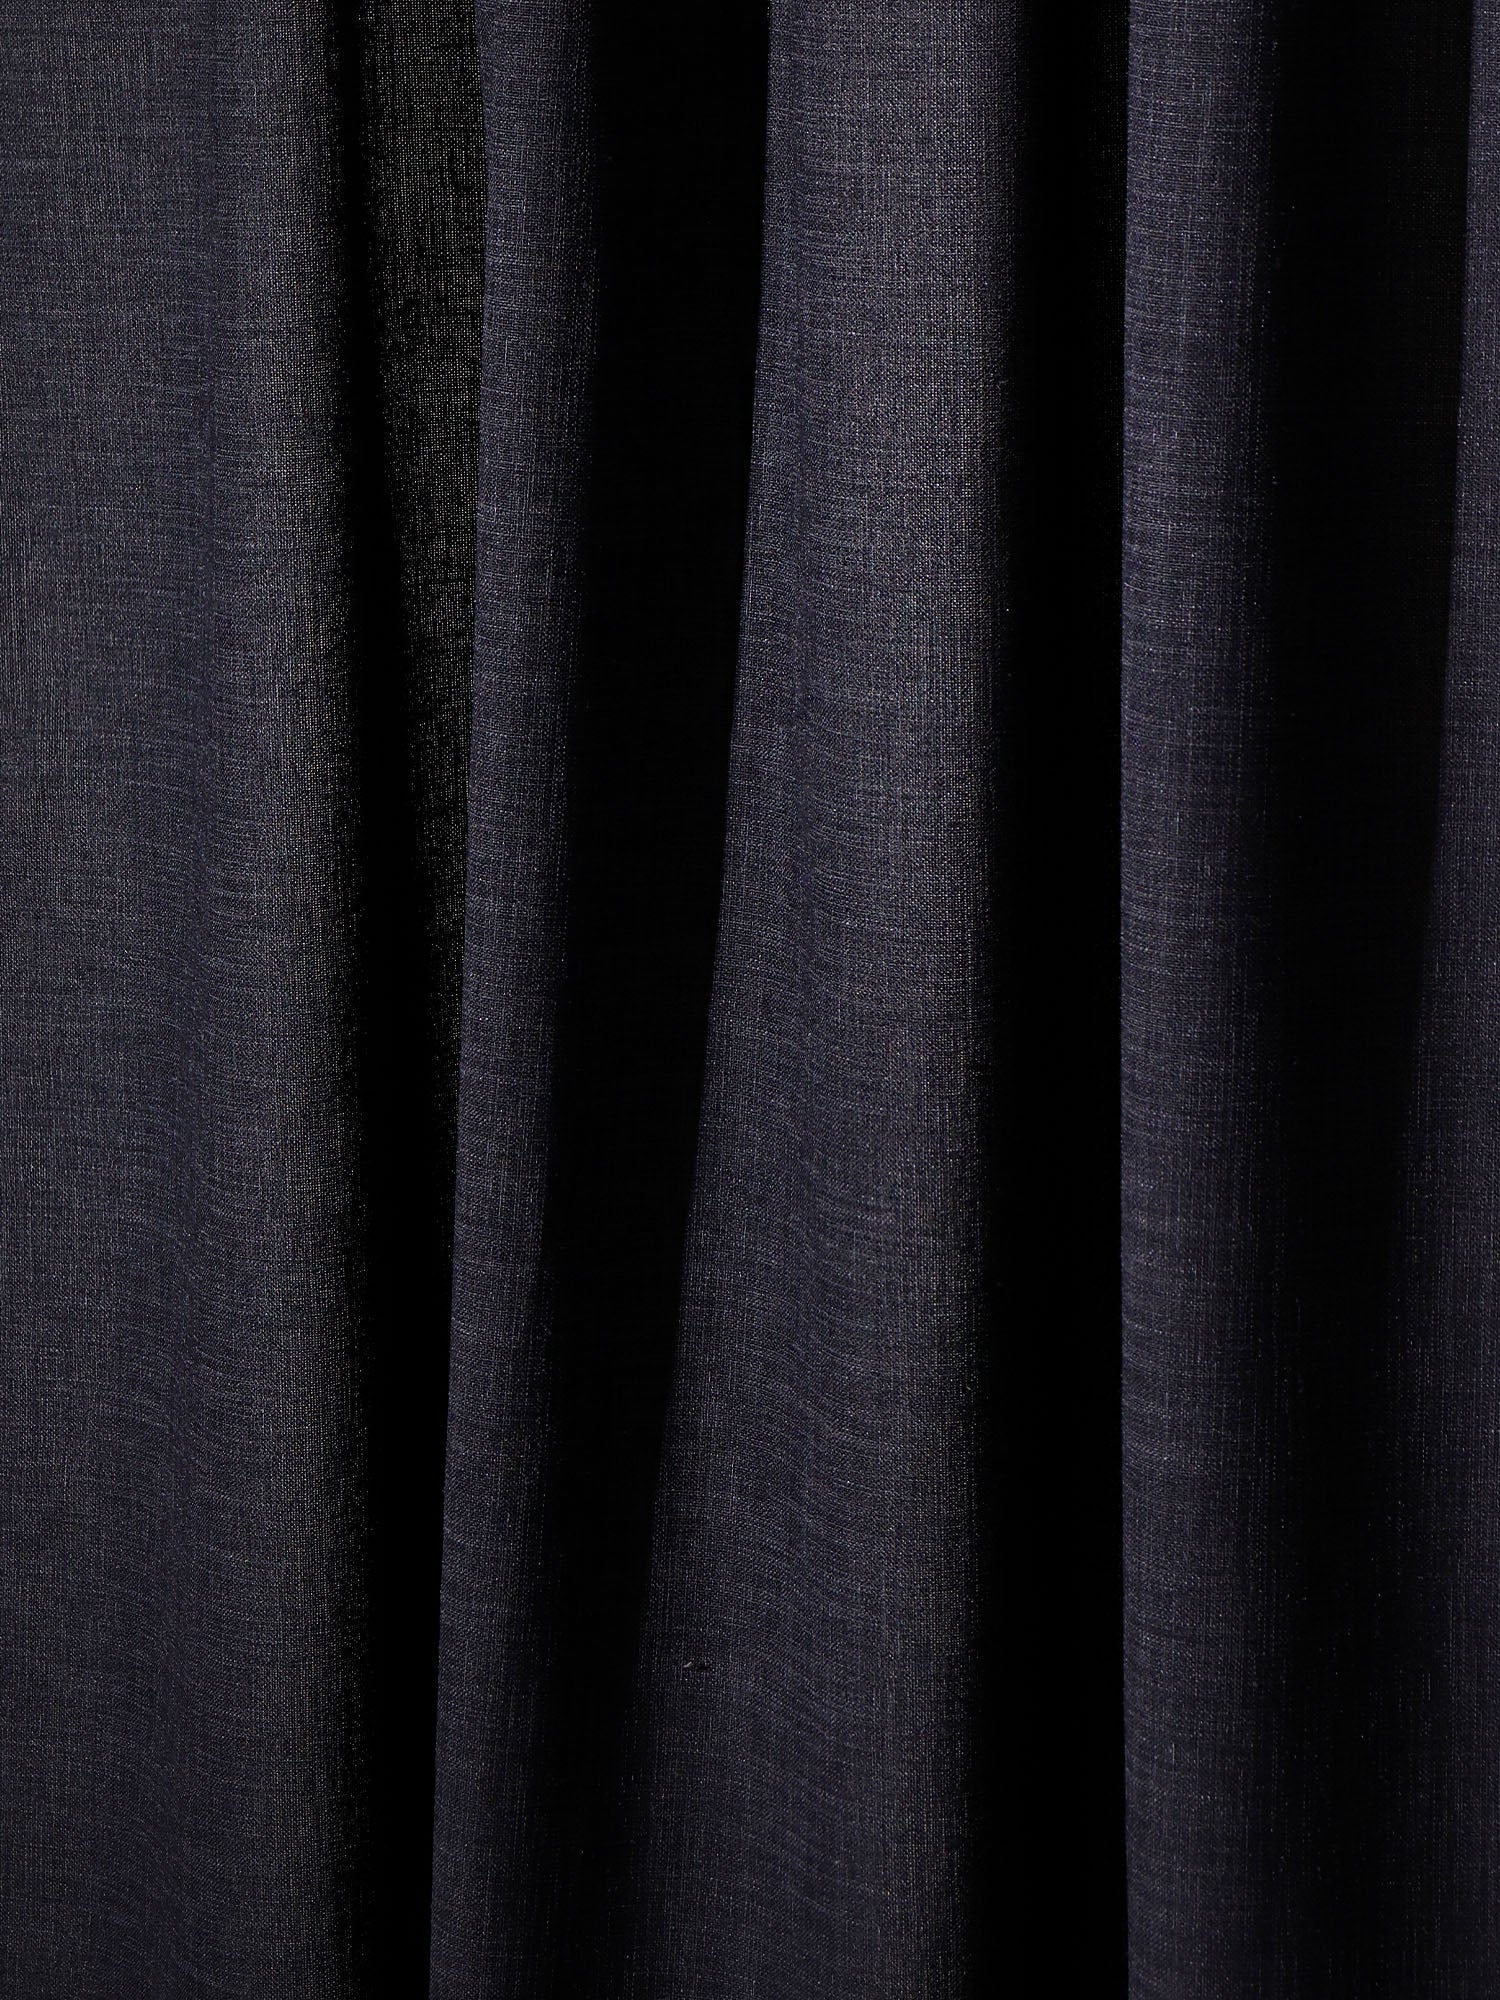 closeup of embroidered window curtain in set of 2 panels in dark blue color with rod pocket for hanging - 50x60 inches